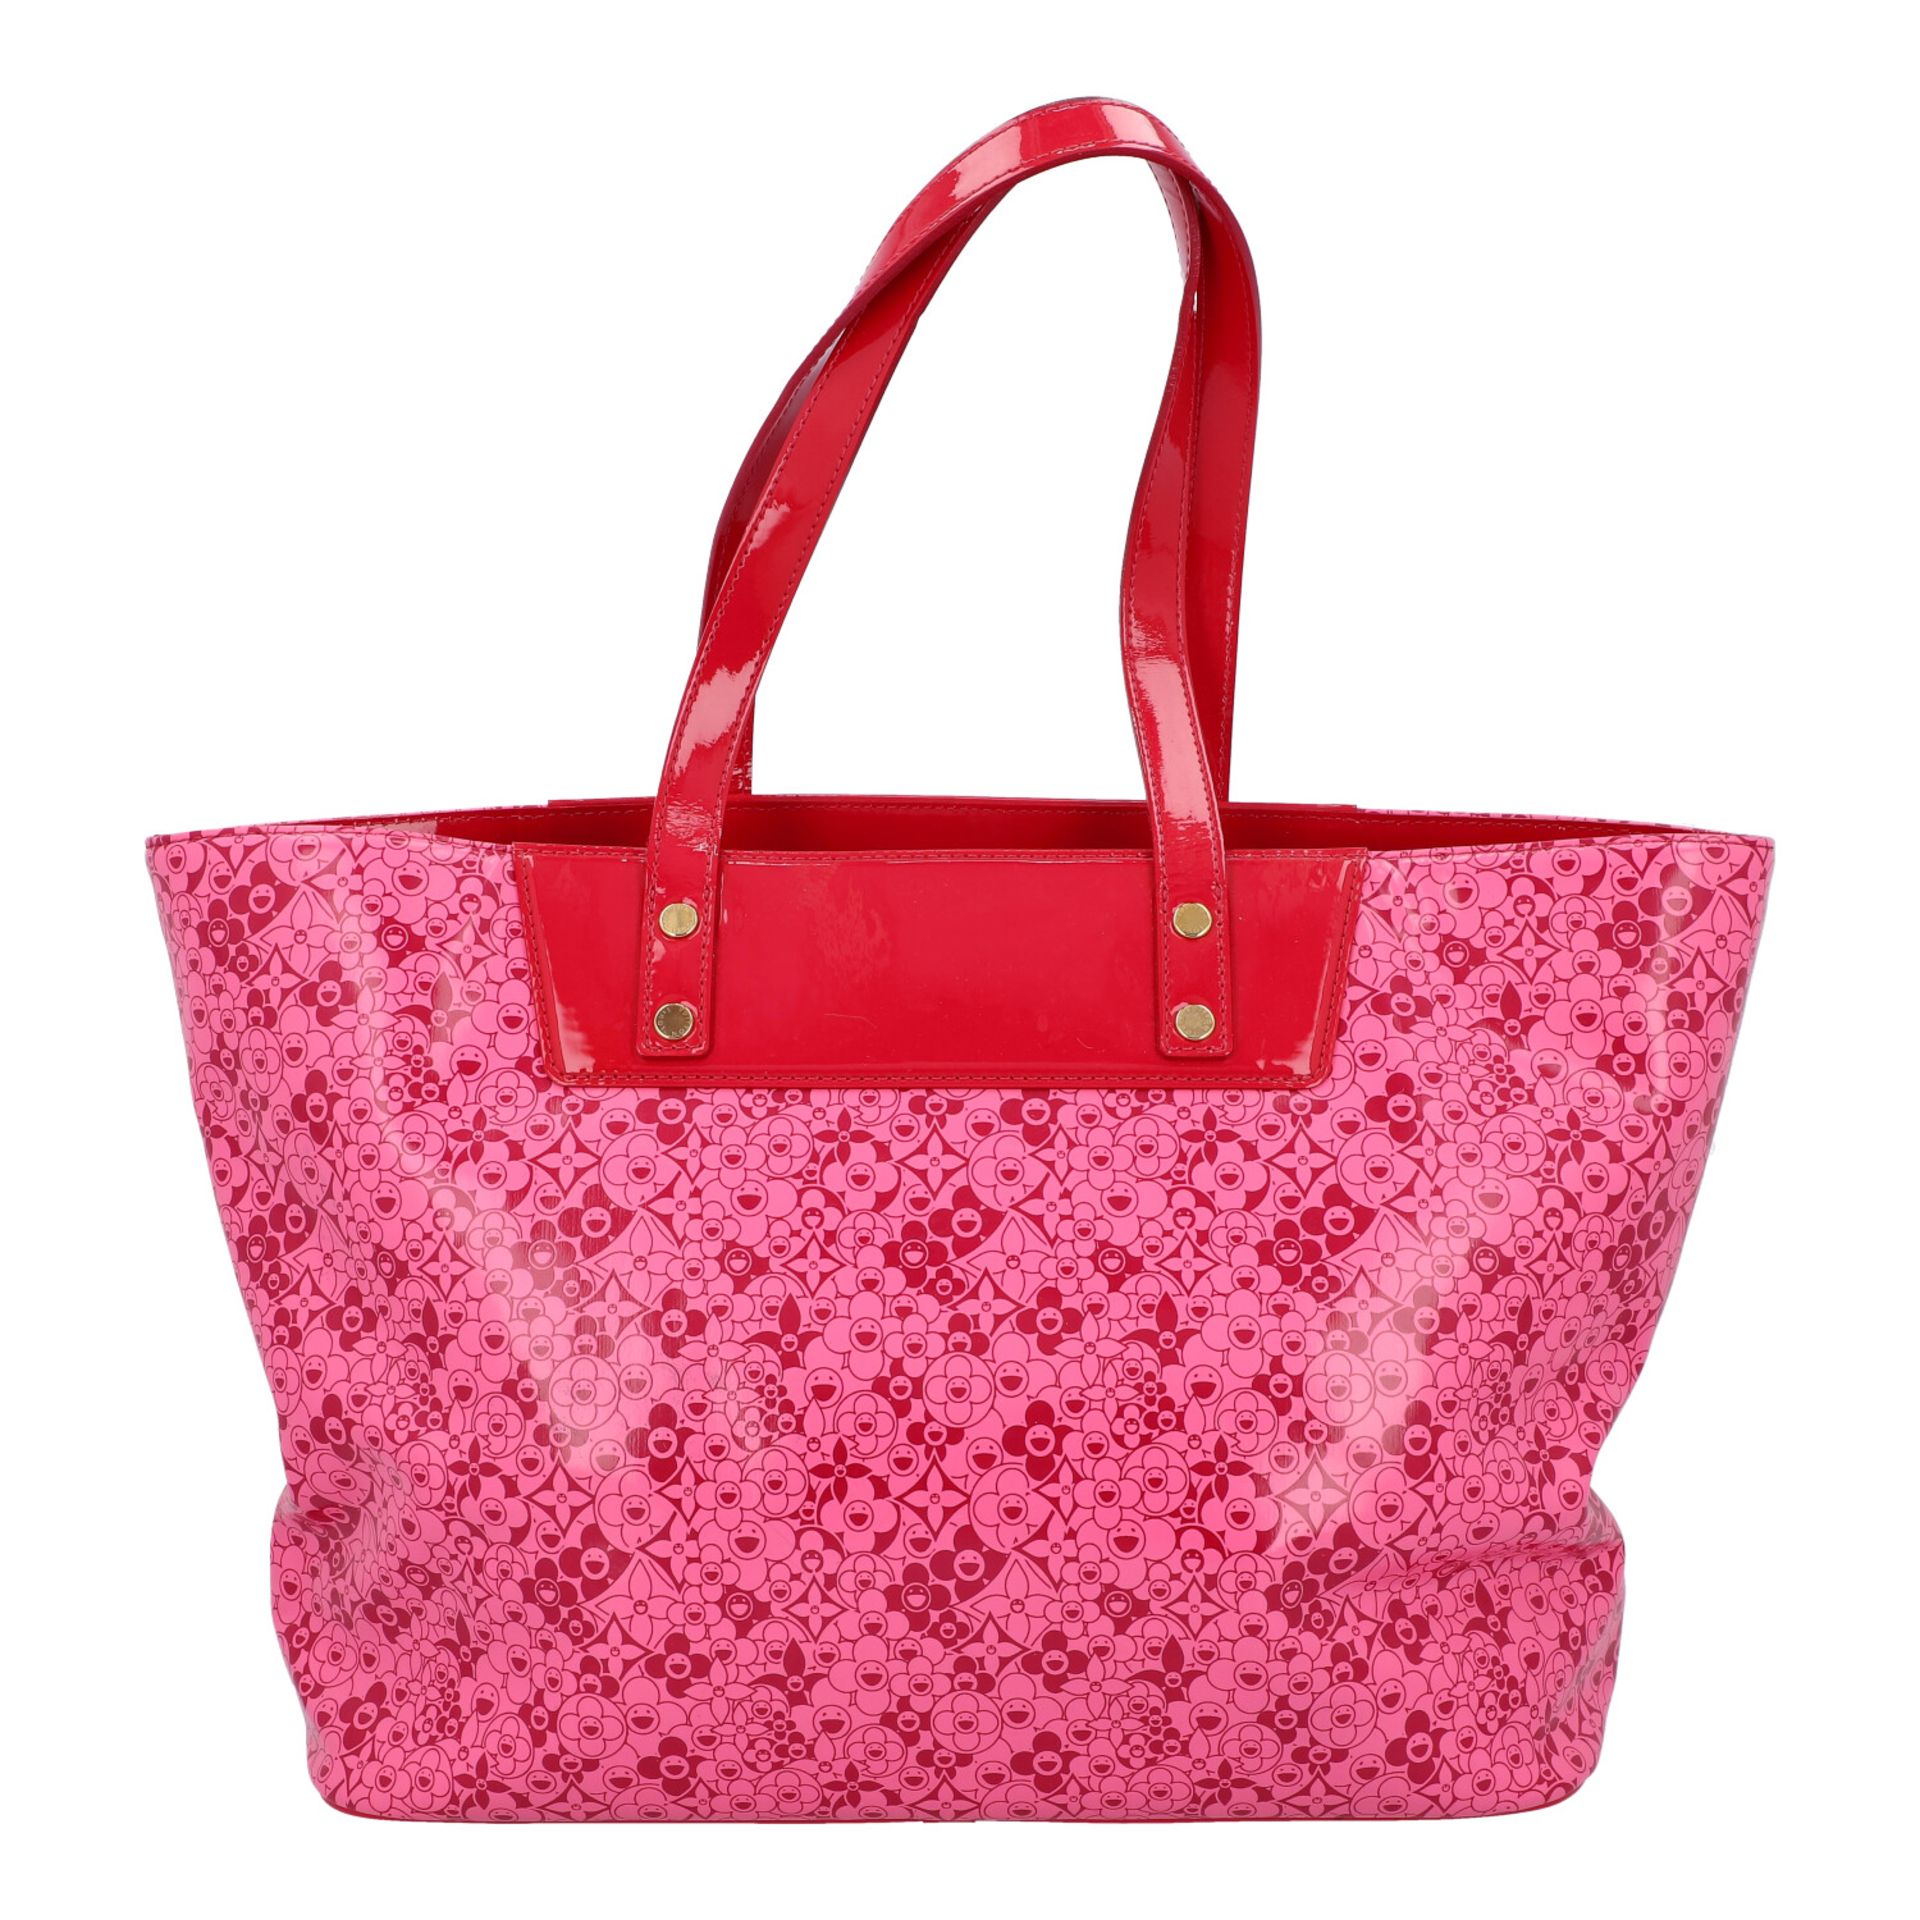 LOUIS VUITTON Shopper "COSMIC BLOSSOM TOTE". - Image 4 of 8